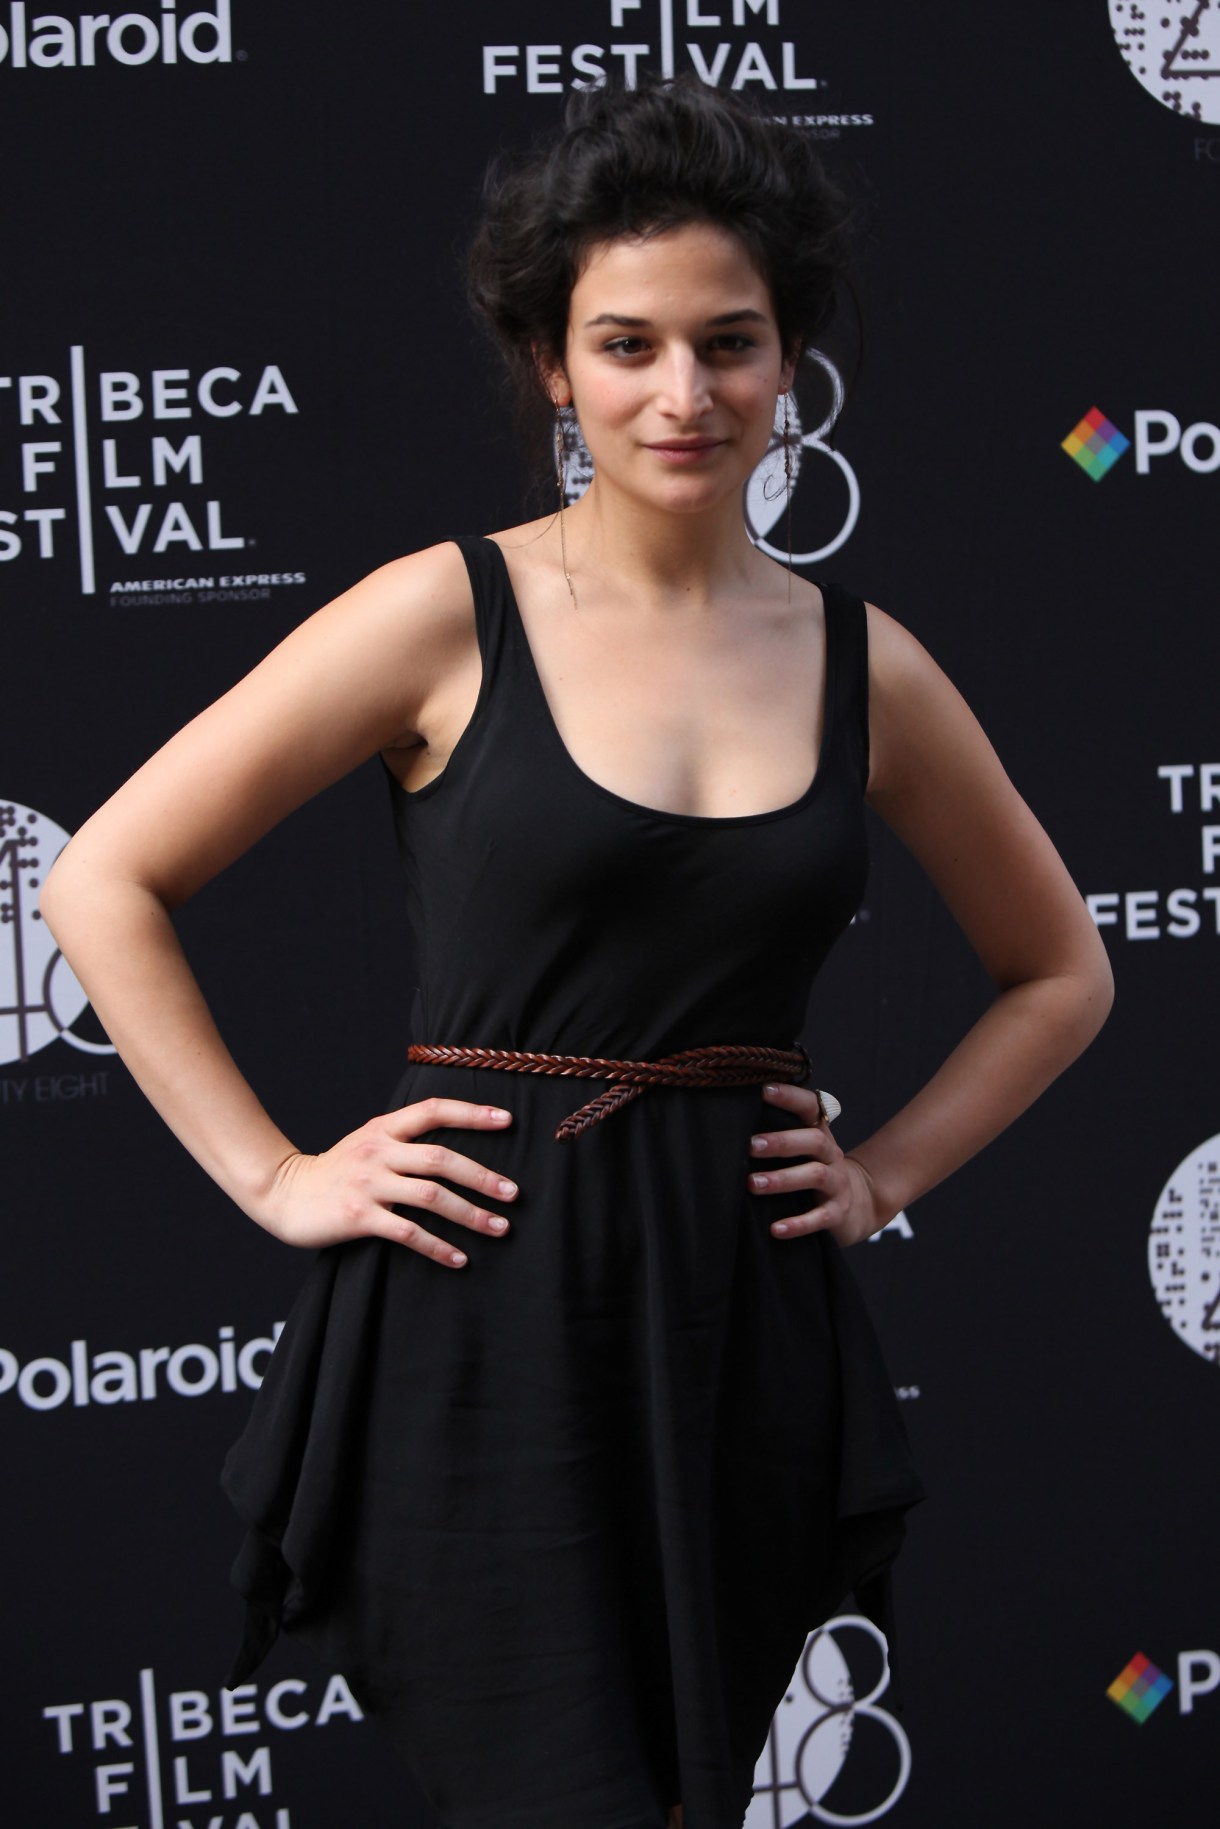 NEW YORK - MAY 02:  Actress Jenny Slate attends the "Saturday Night" after party during the 2010 Tribeca Film Festival at Forty Eight on May 2, 2010 in New York City. 